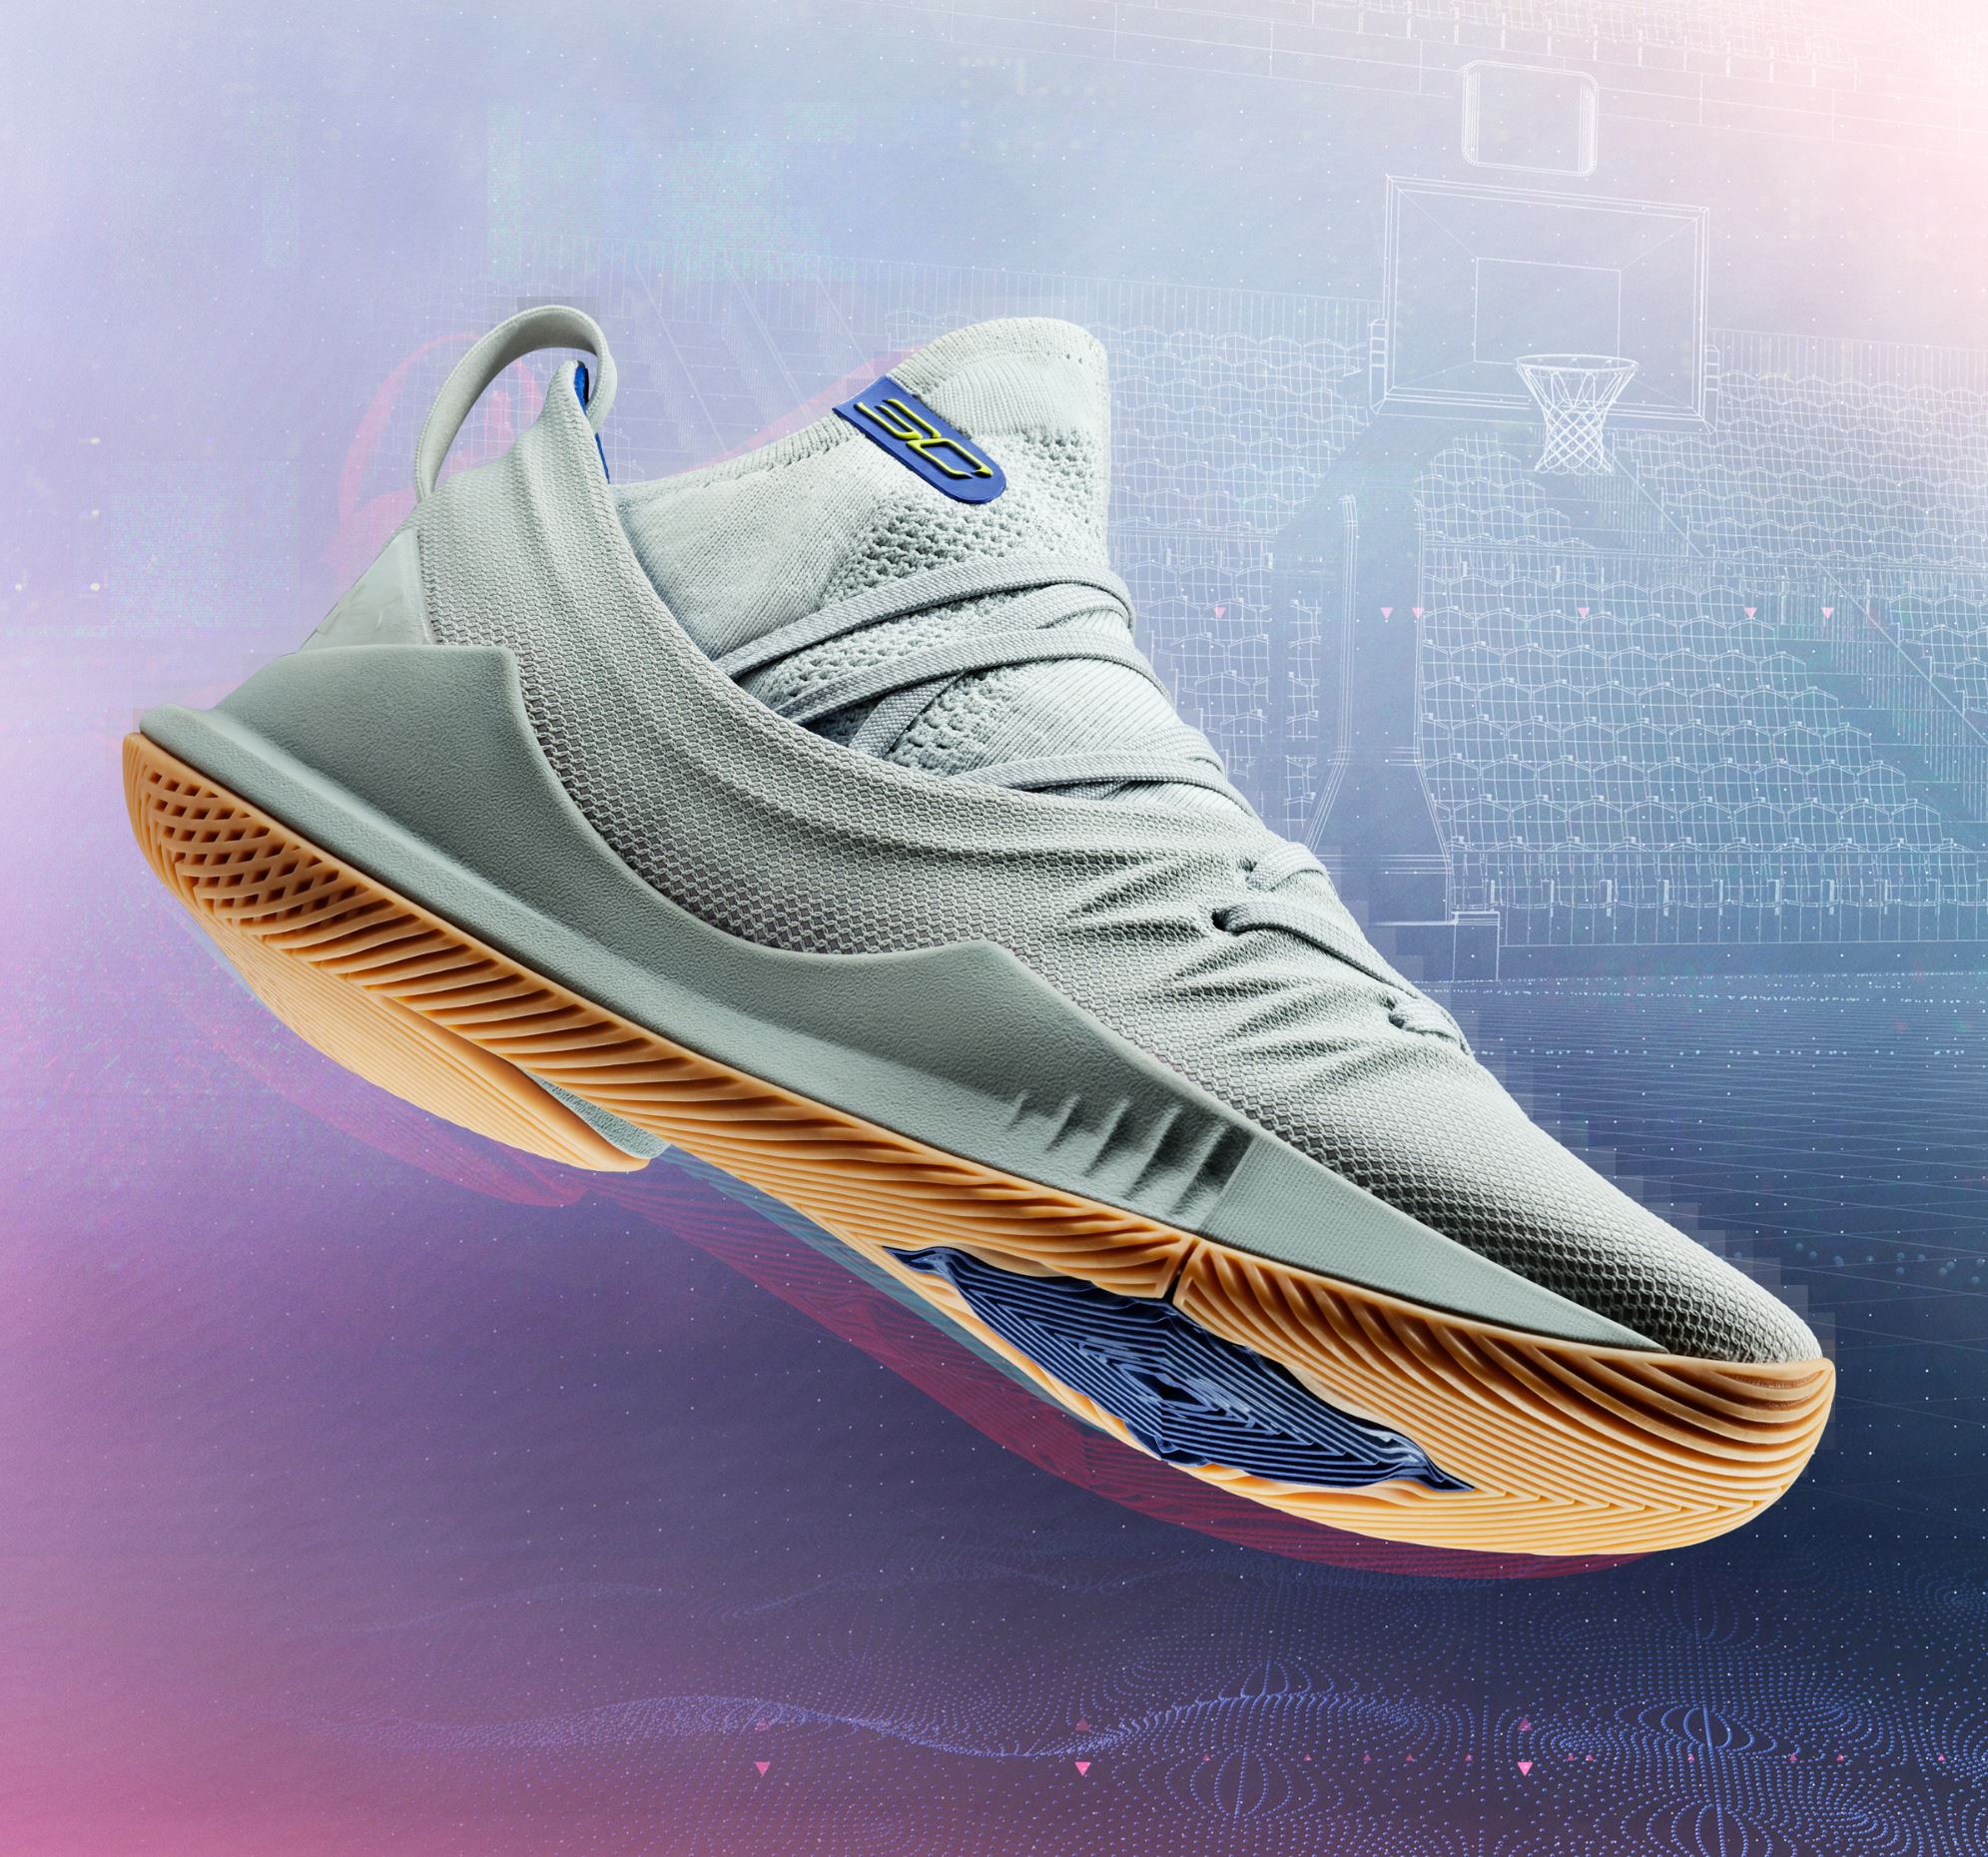 The Curry 5 'Grey/Gum' Release Date is Official - WearTesters